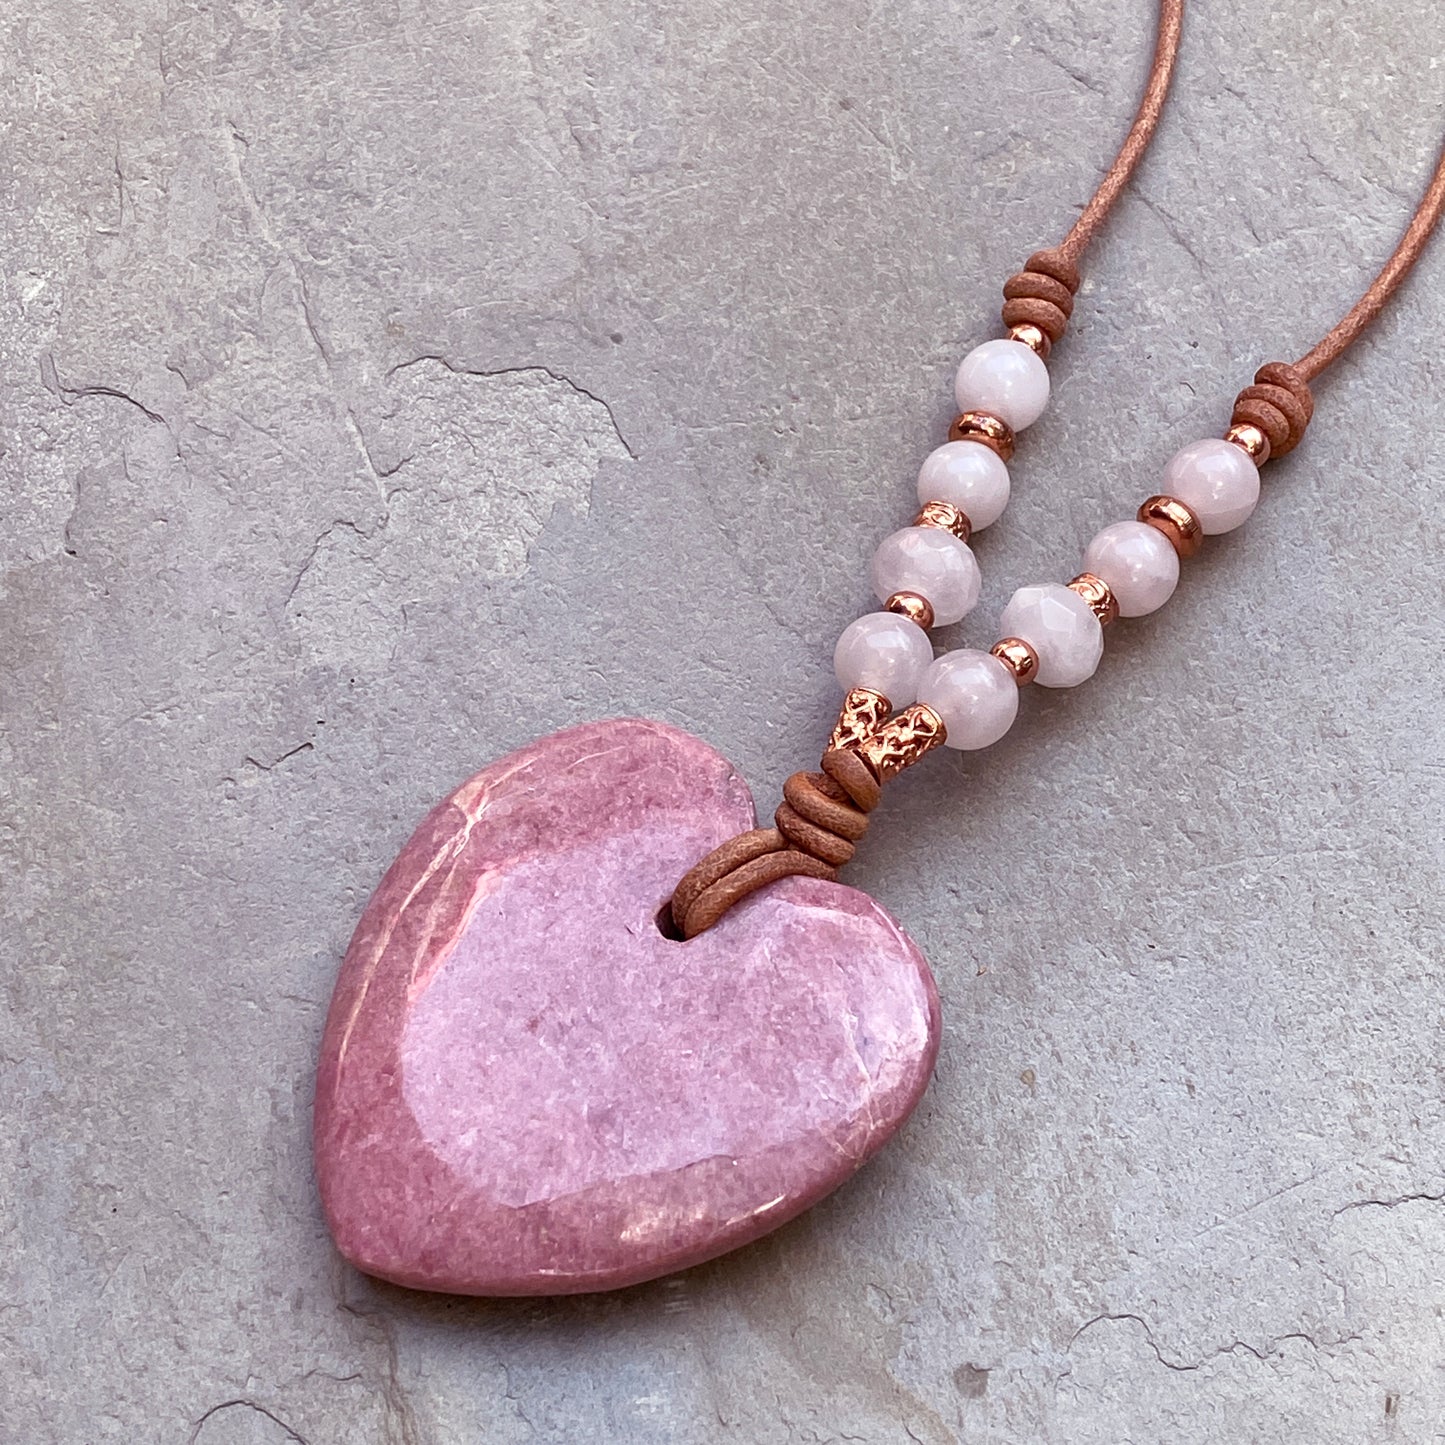 Rhodonite gemstone Heart with Rose Quartz and Copper Leather necklace